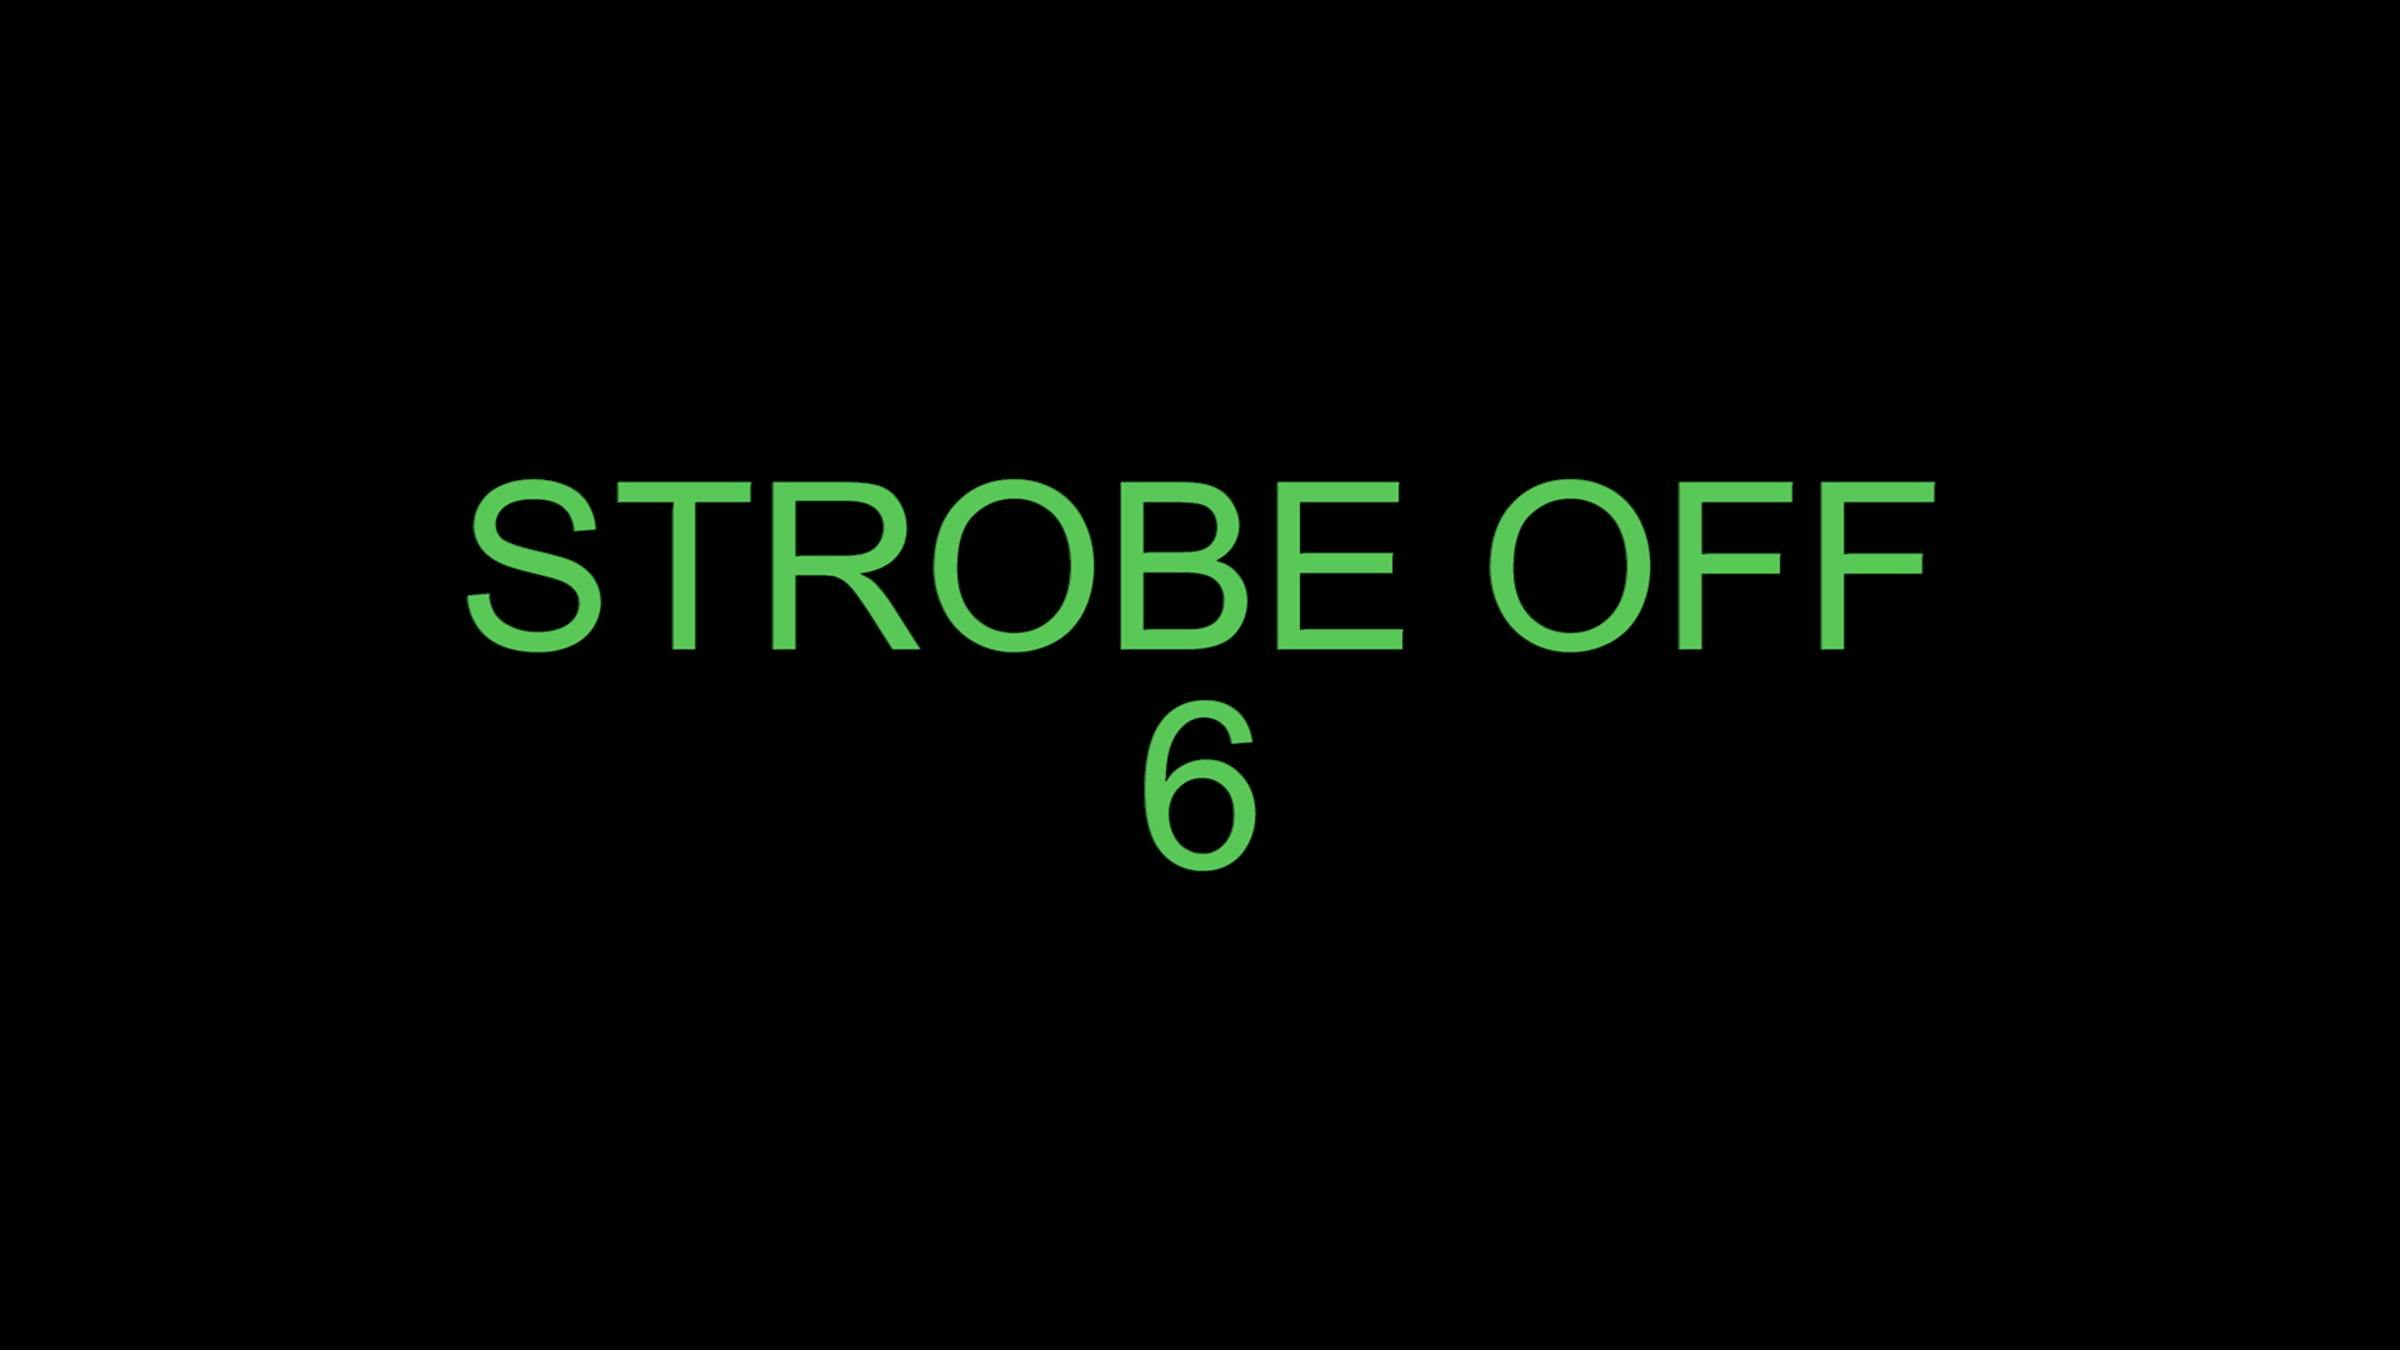 Black screen with green text which reads 'STROBE OFF 6' in capital letters.